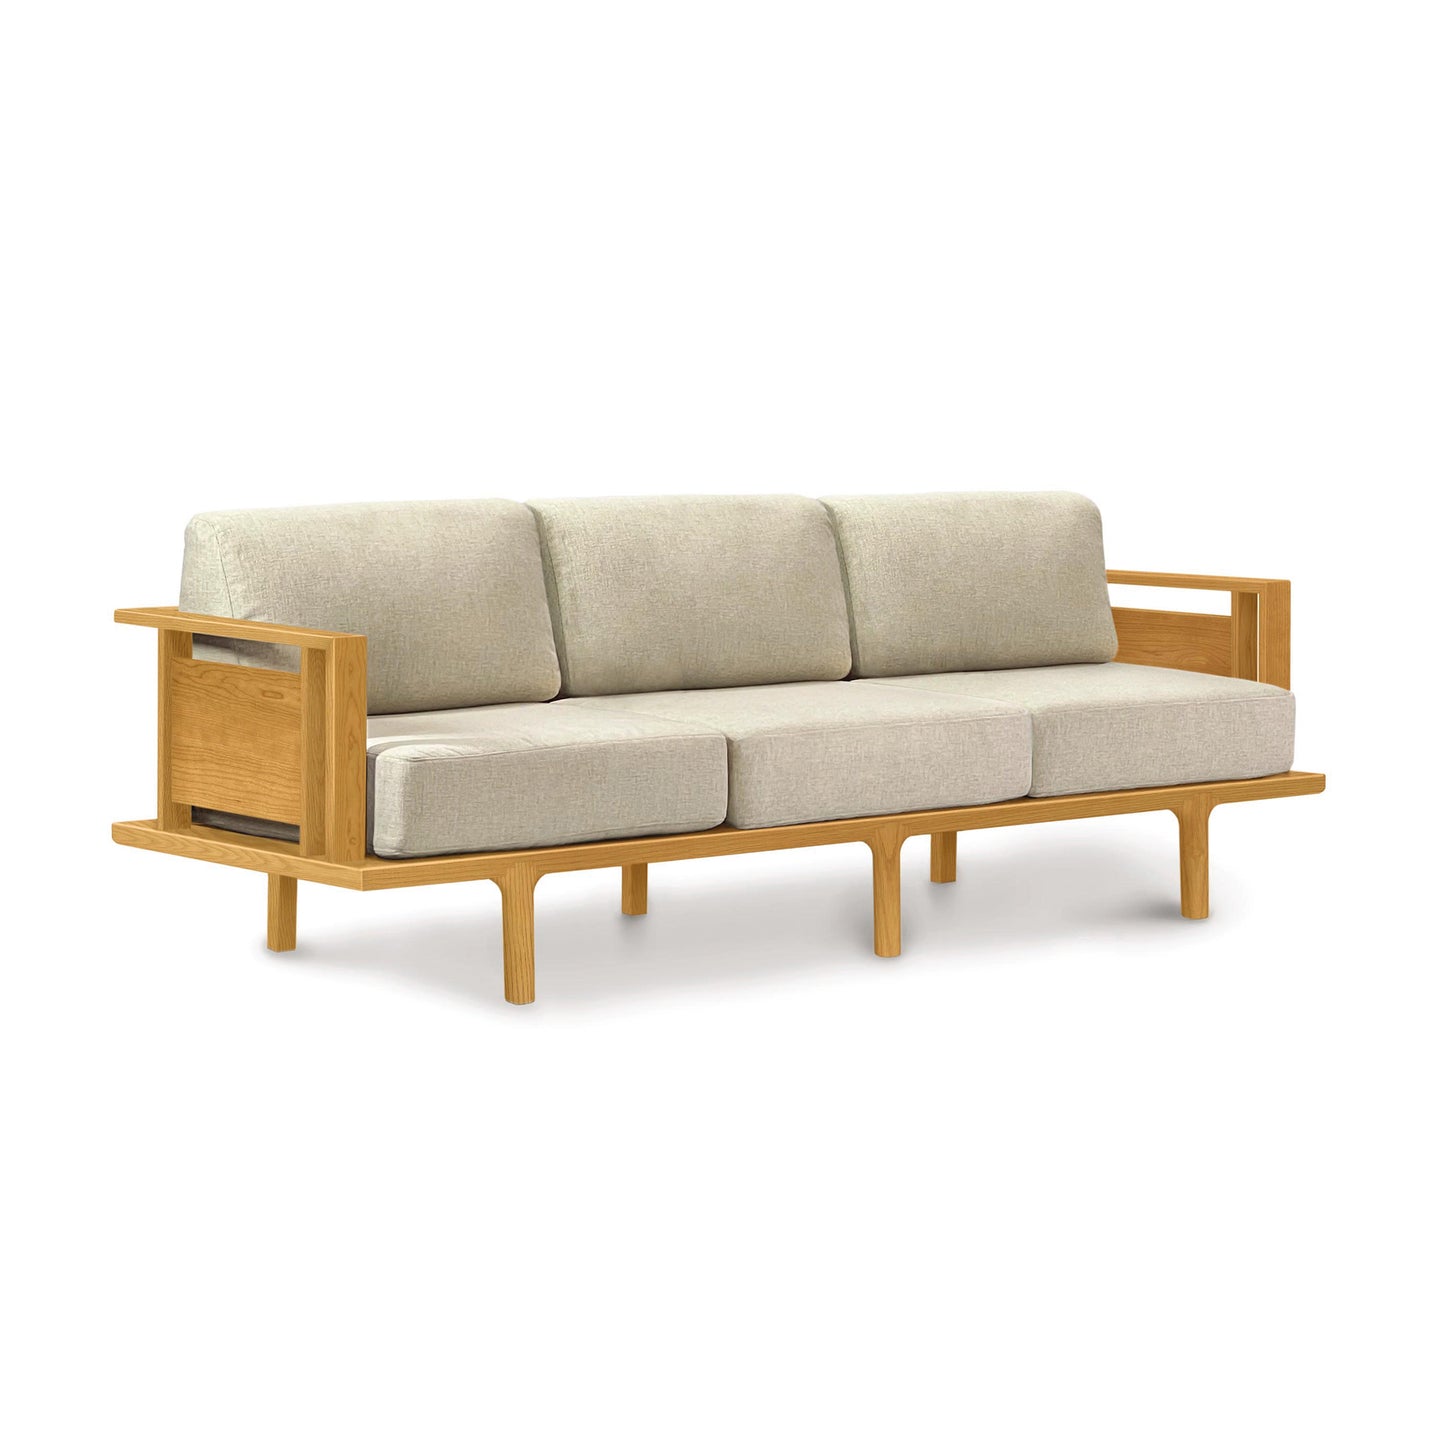 A Sierra Cherry Upholstered Sofa with a wooden frame and contemporary design from Copeland Furniture.